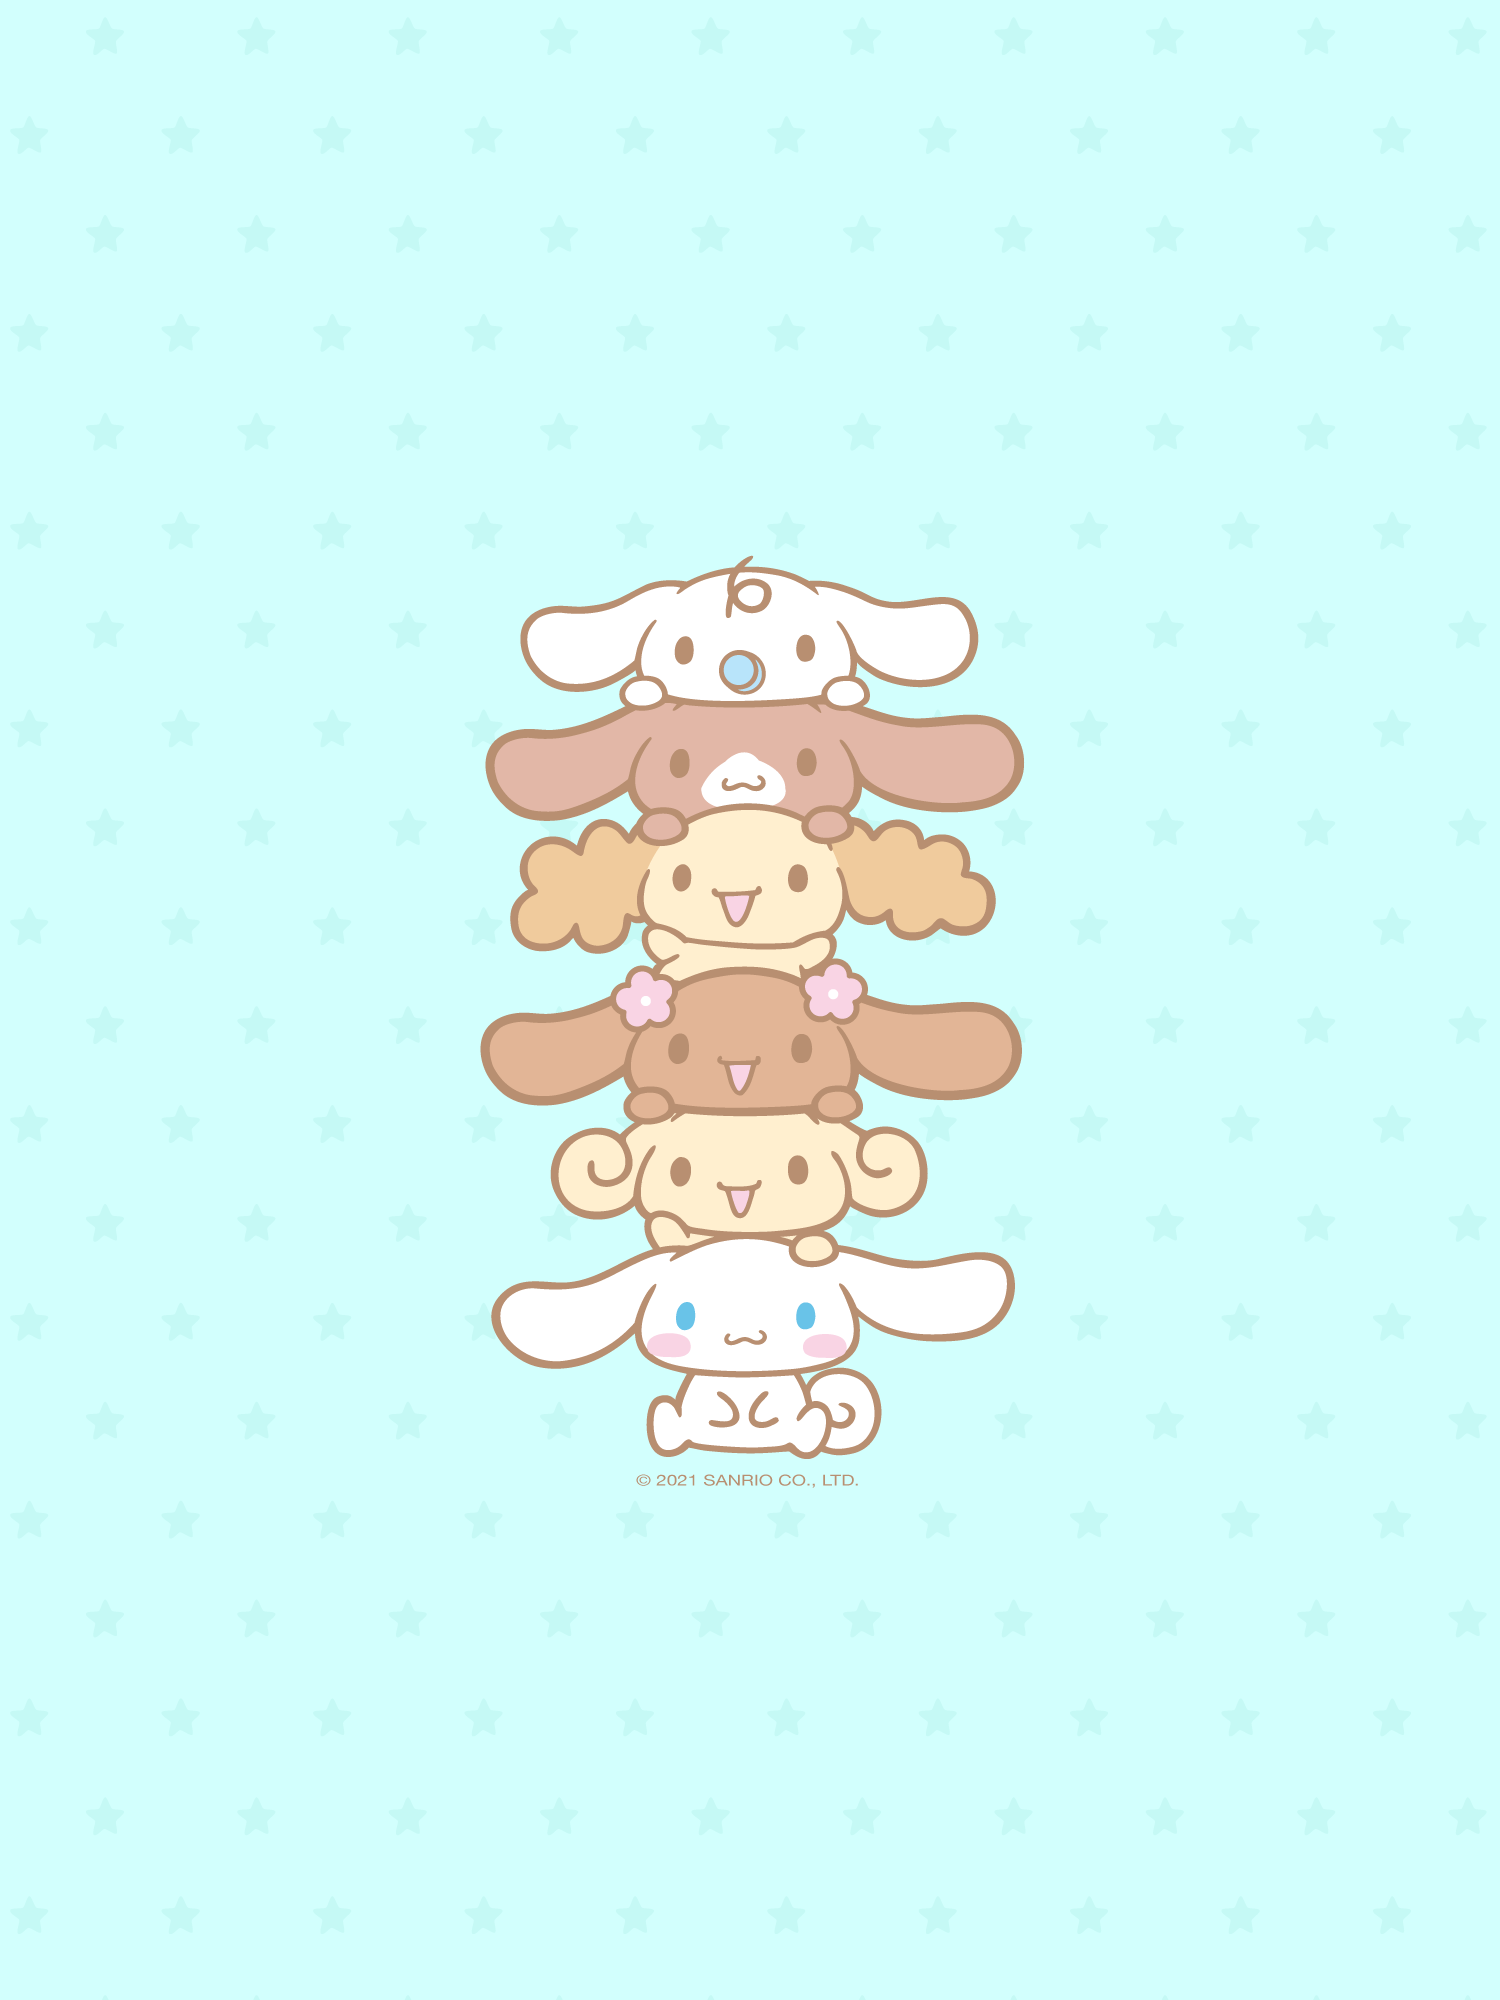 A tower of Sanrio characters including Kuromi, Cinnamoroll, and My Melody. - Cinnamoroll